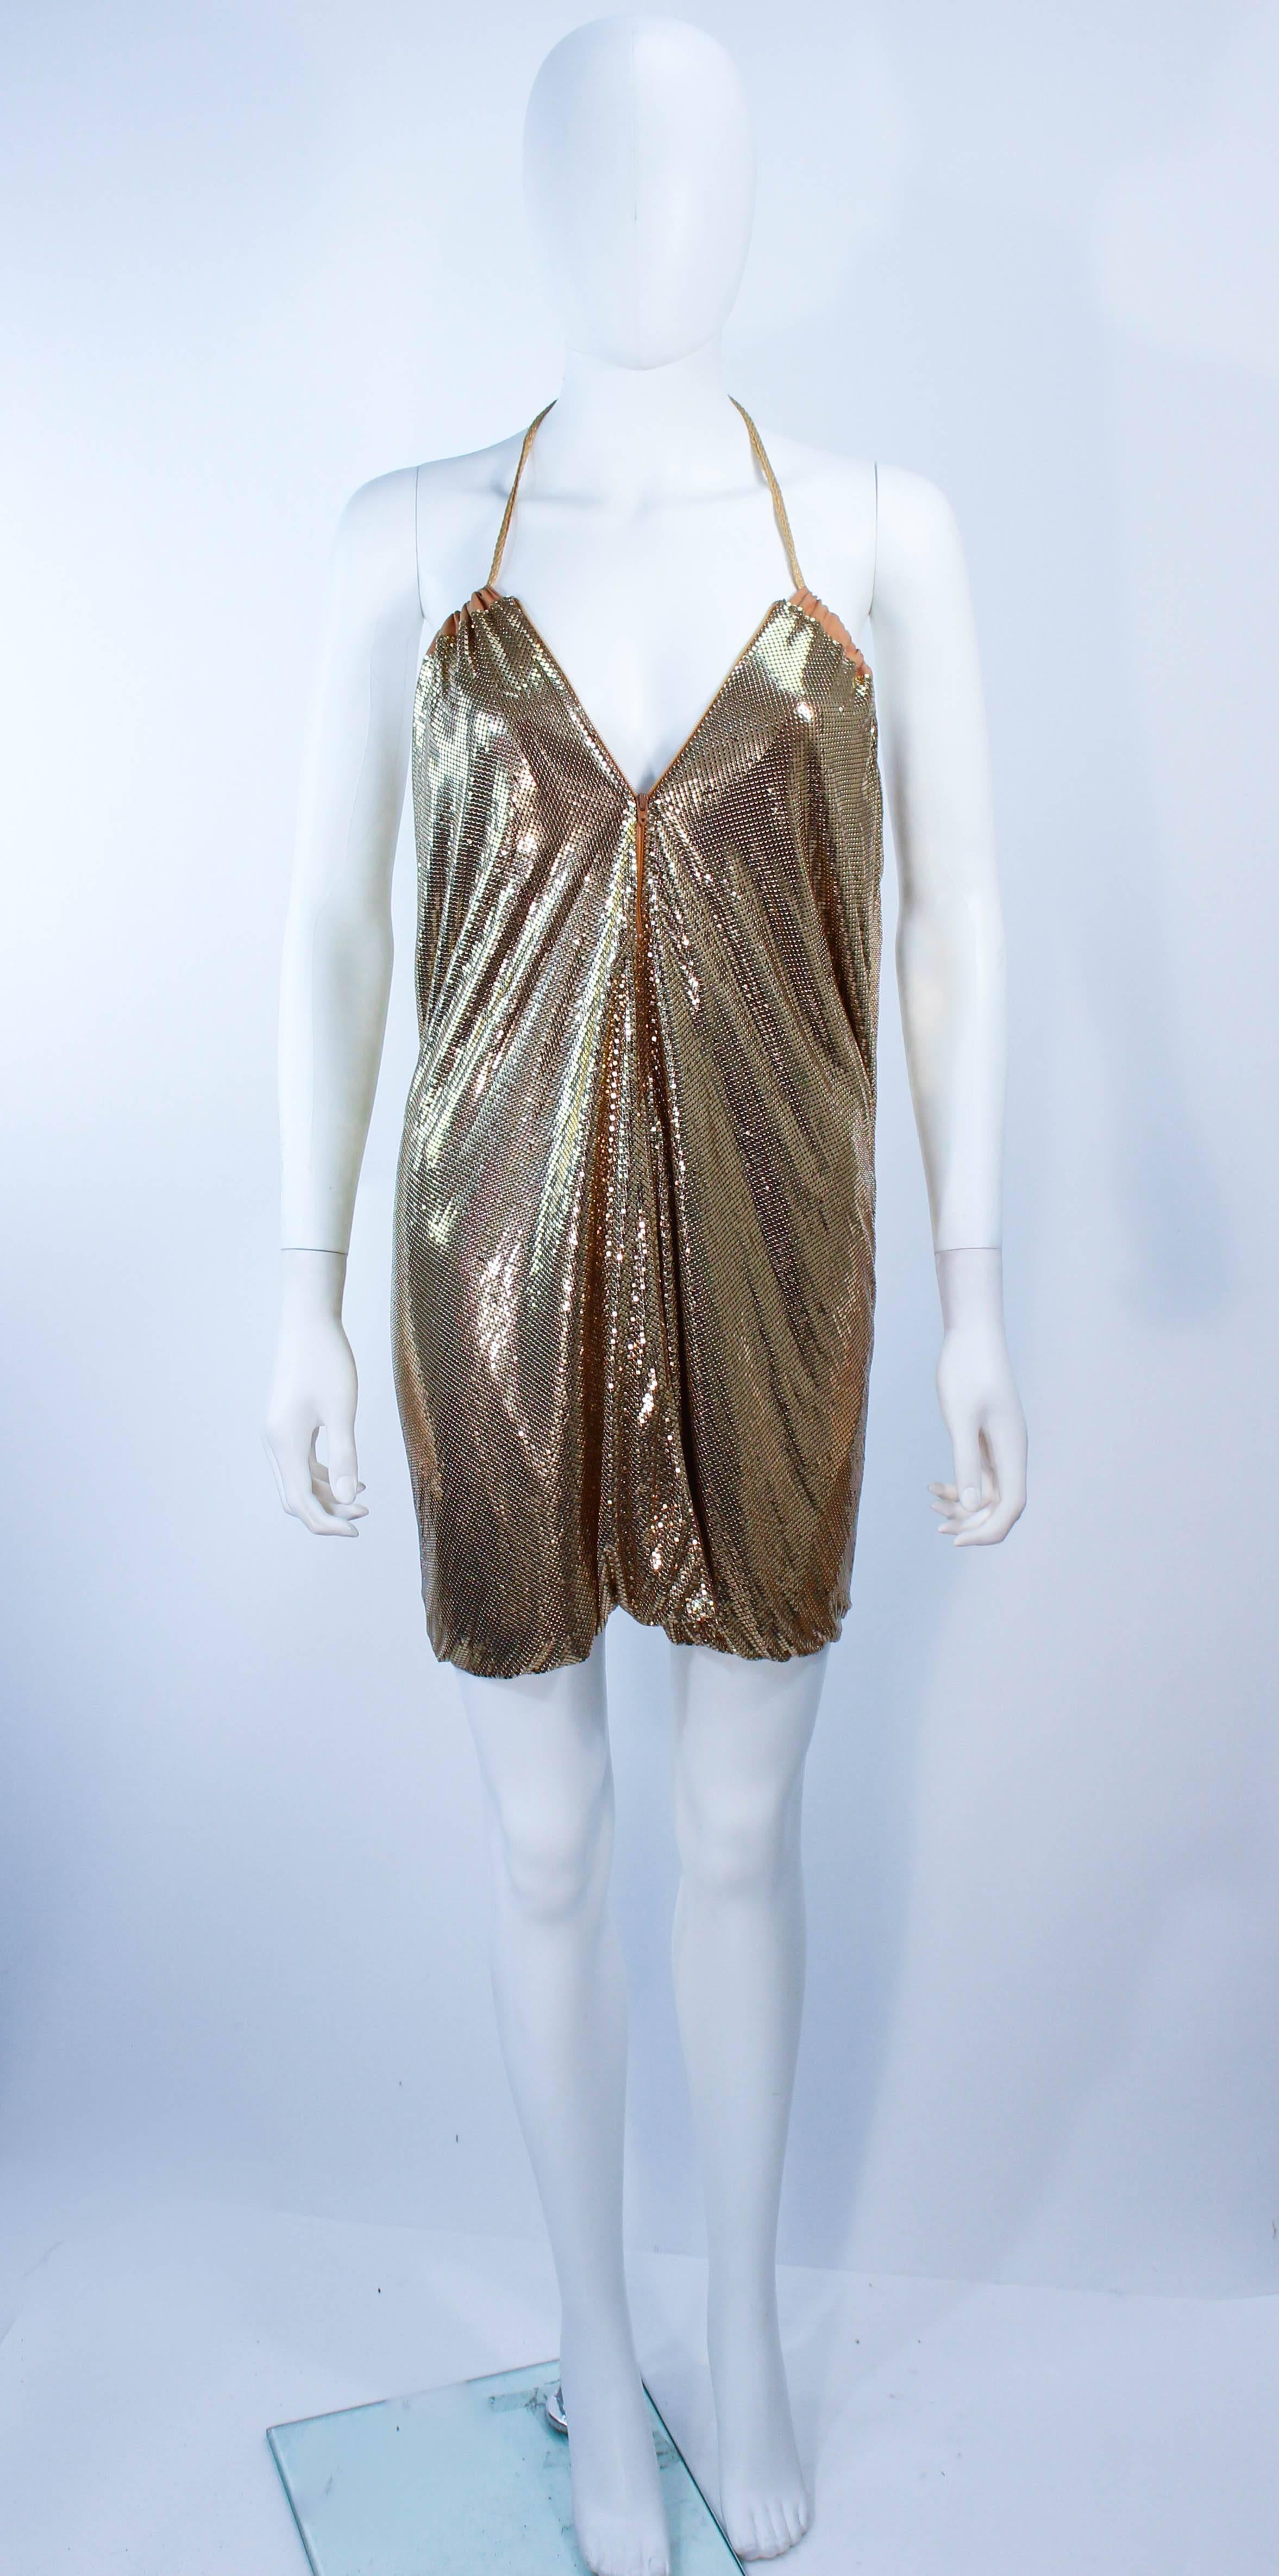 This Whiting and Davis design is composed of a gold mesh. This item can be fashioned as a draped halter dress or skirt. Features a zipper closure with drawstring tassel detail. In excellent vintage condition.

**Please cross-reference measurements